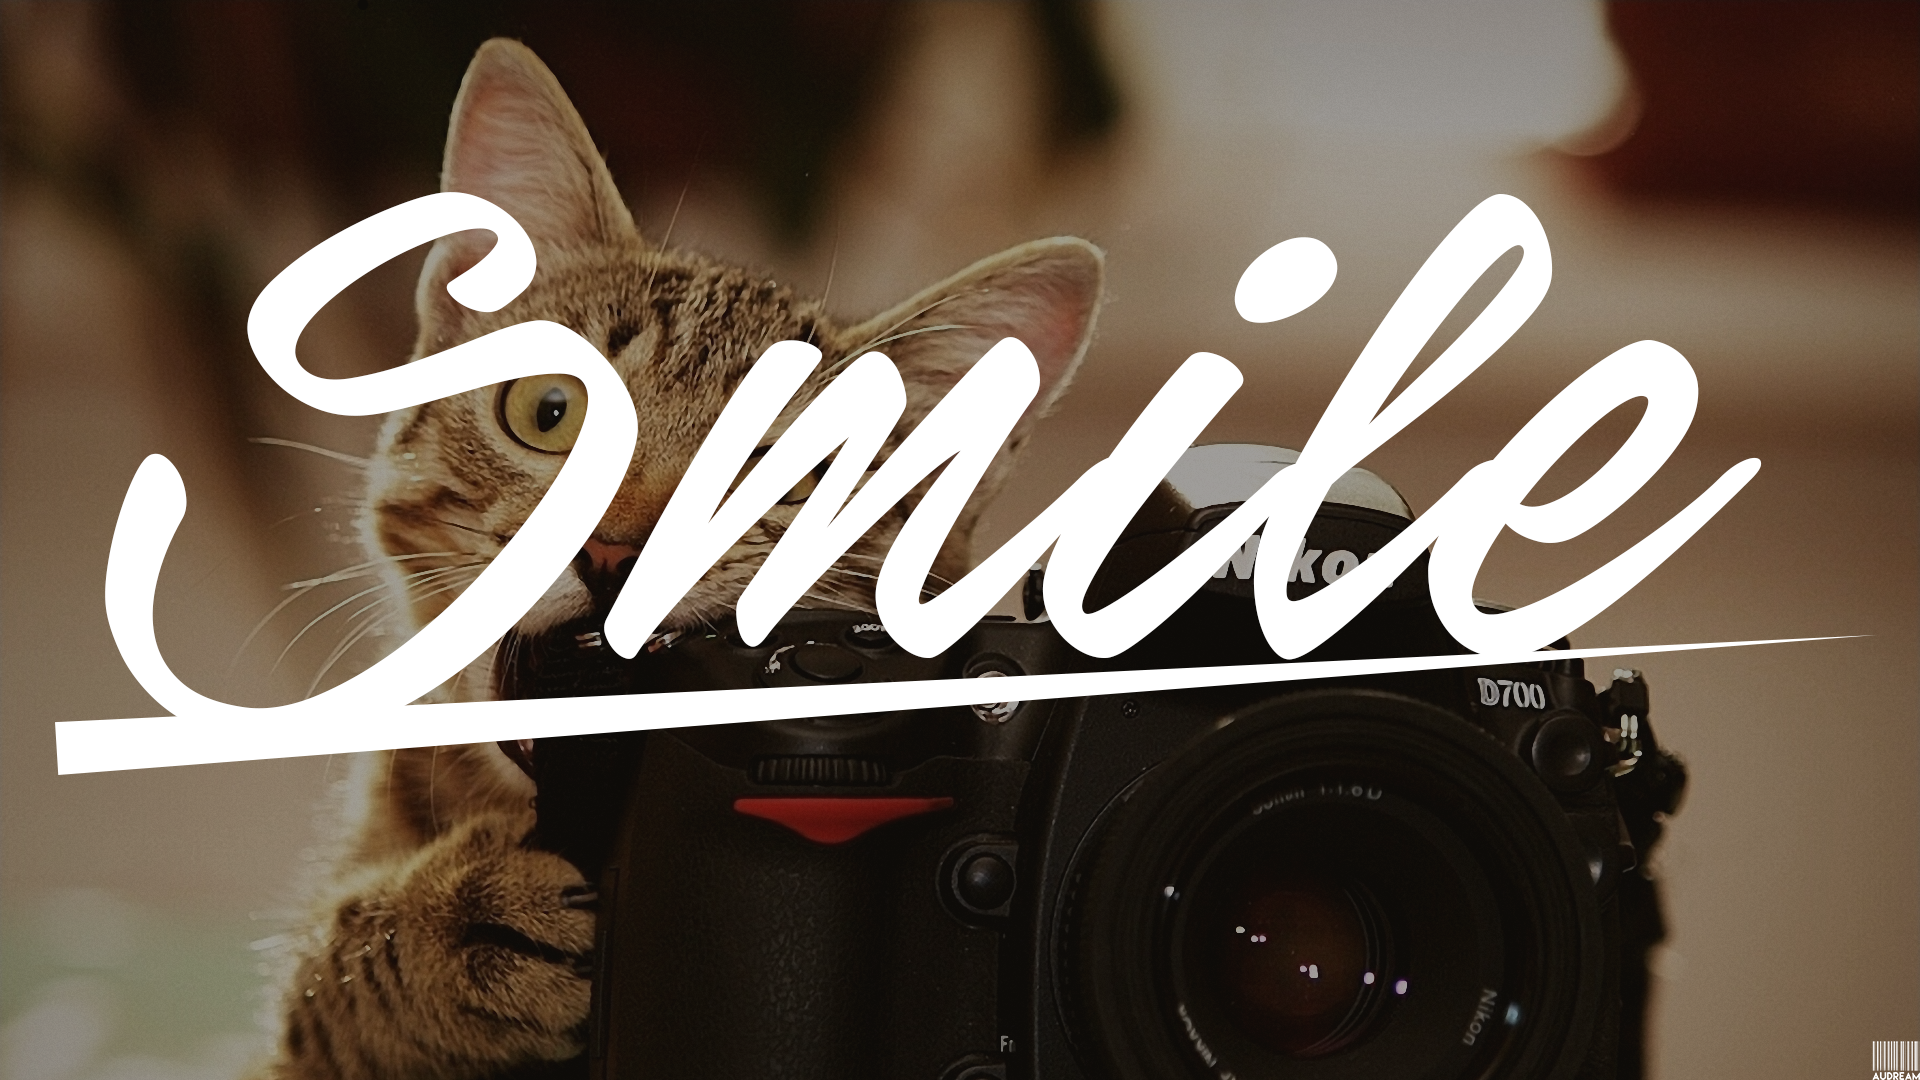 General 1920x1080 cats camera typography animals numbers mammals Nikon smiling